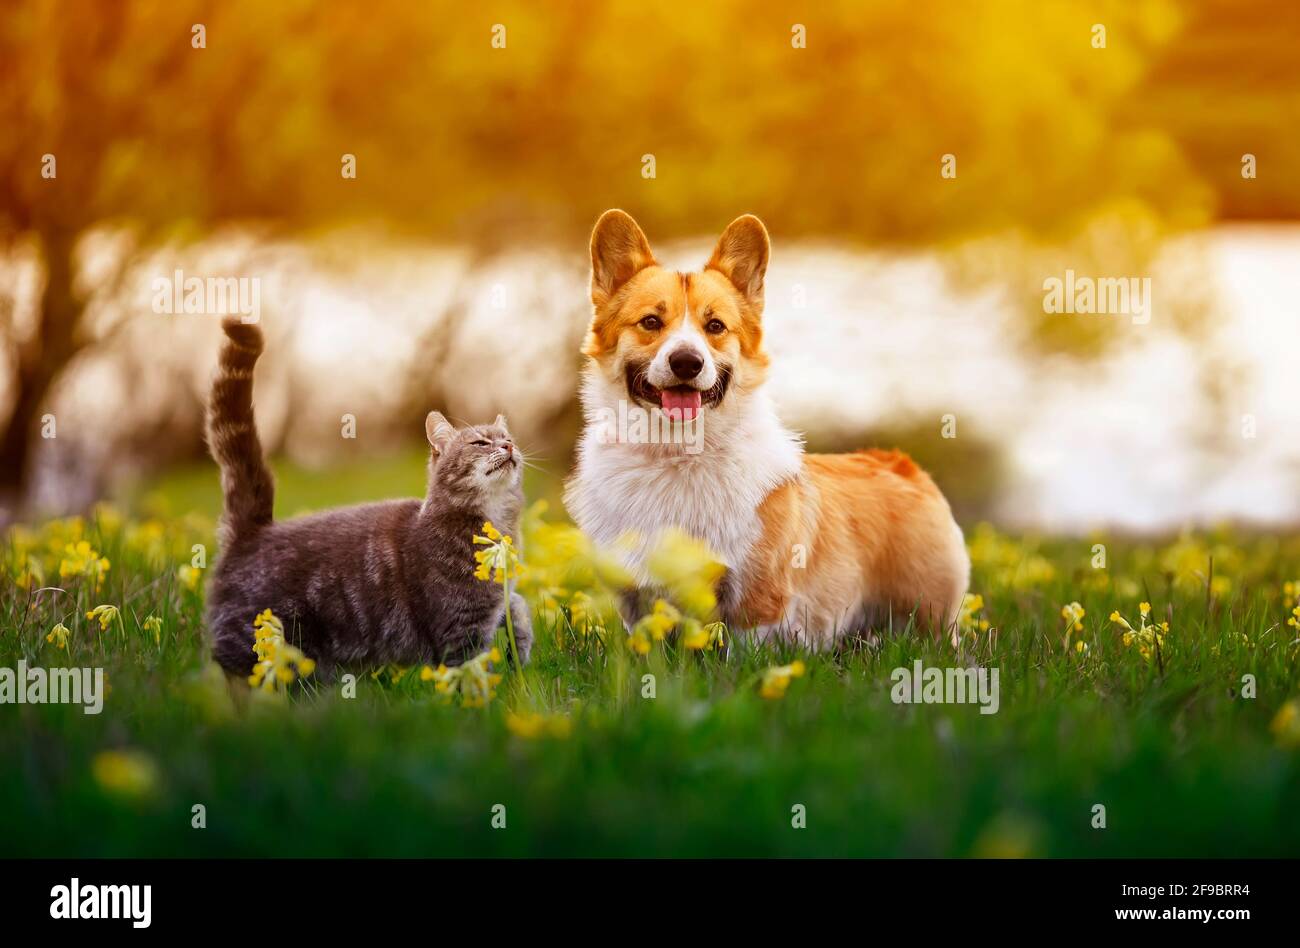 cute fluffy friends a corgi dog and a tabby cat sit together in a sunny spring meadow Stock Photo